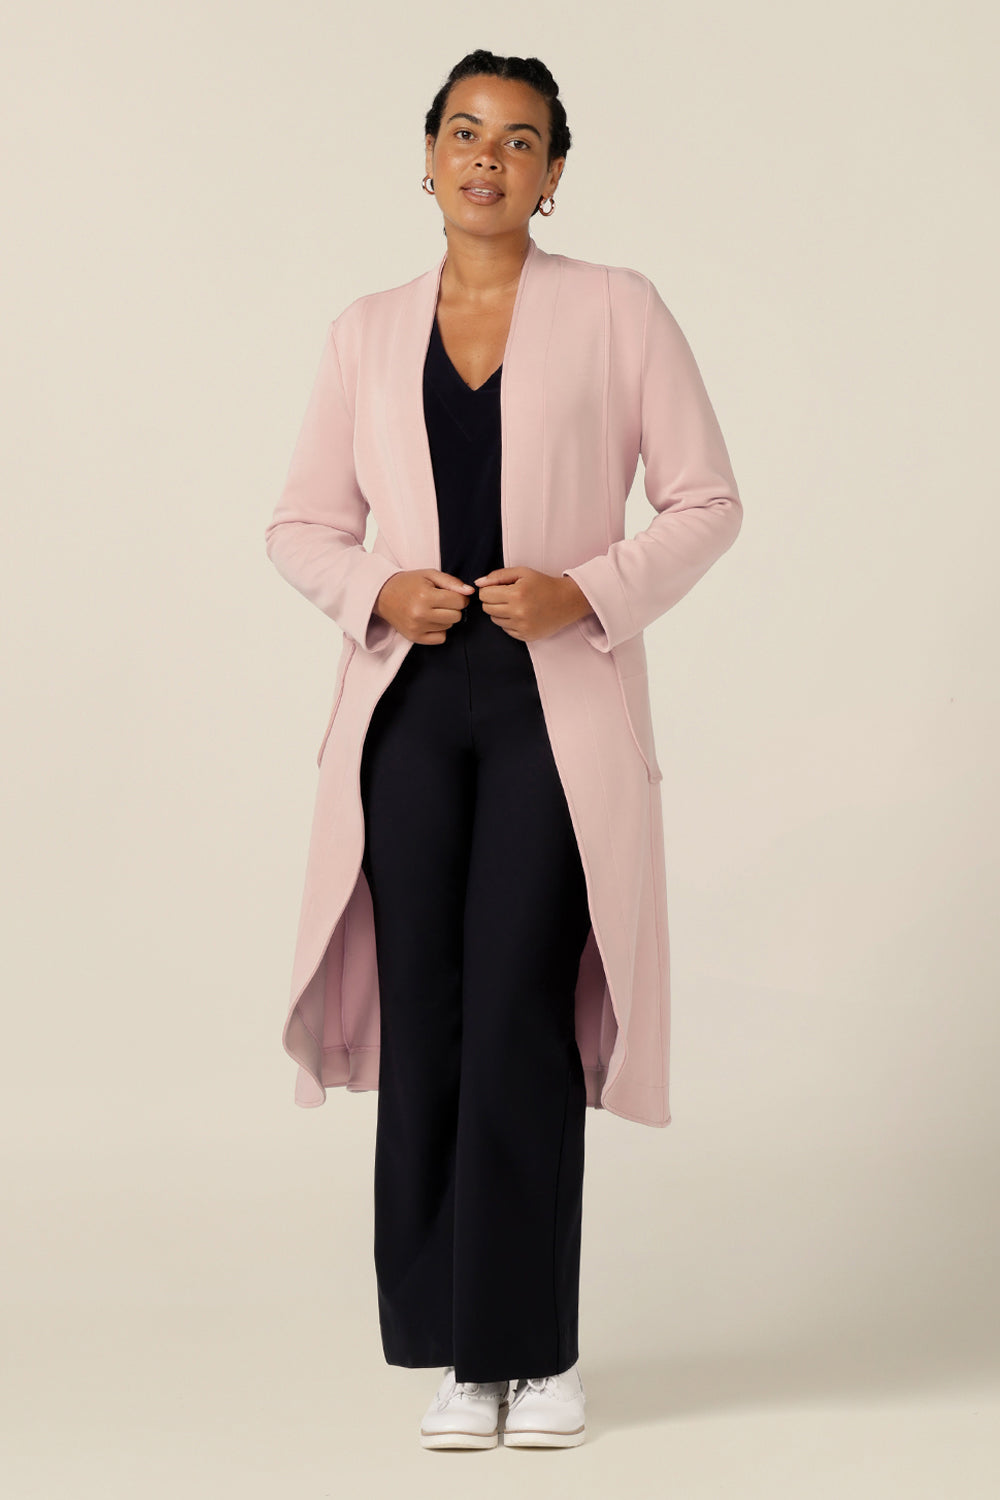 A good lightweight coat for travel, this softly tailored trenchcoat by Australia and New Zealand fashion brand, L&F is made in winter-weight modal to shape comfortable coat for petite to plus size women.